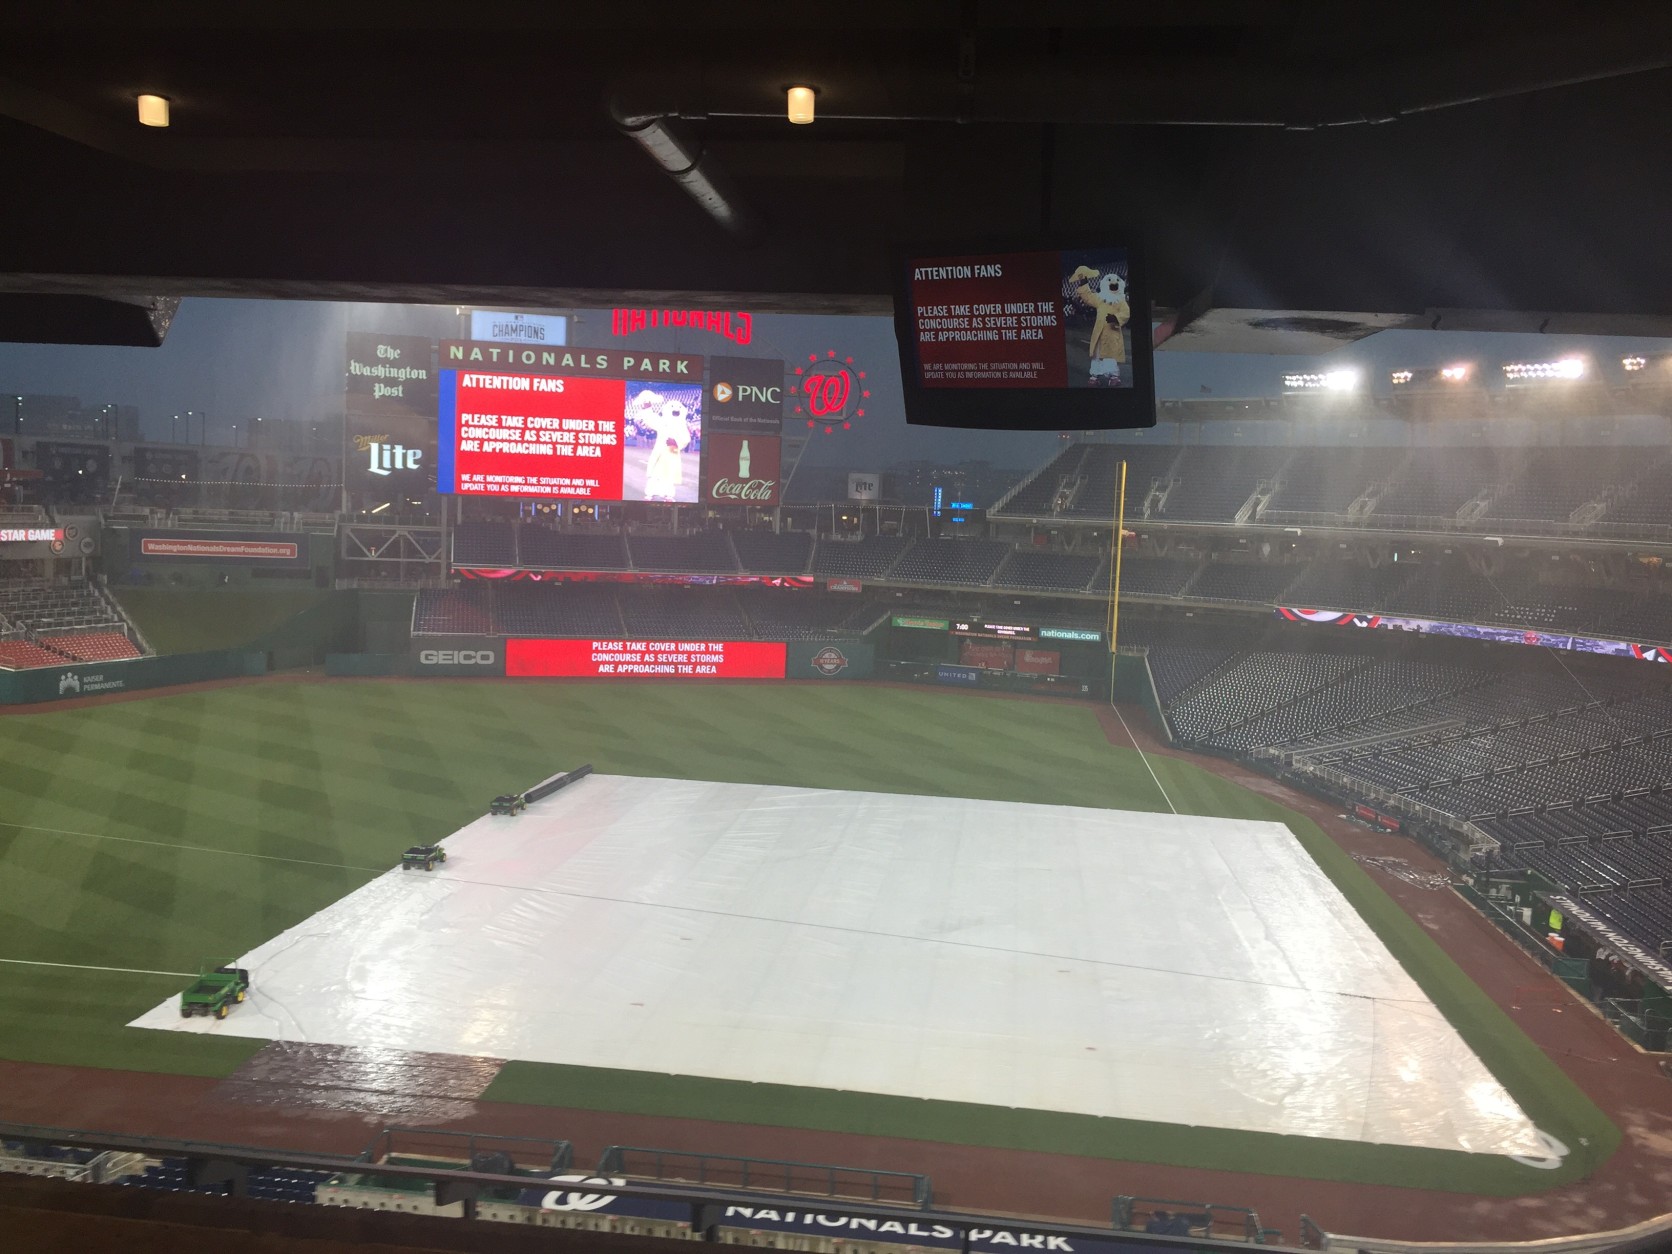 A soggy Nationals Park on Tuesday evening. (WTOP/Rick Hinshaw)